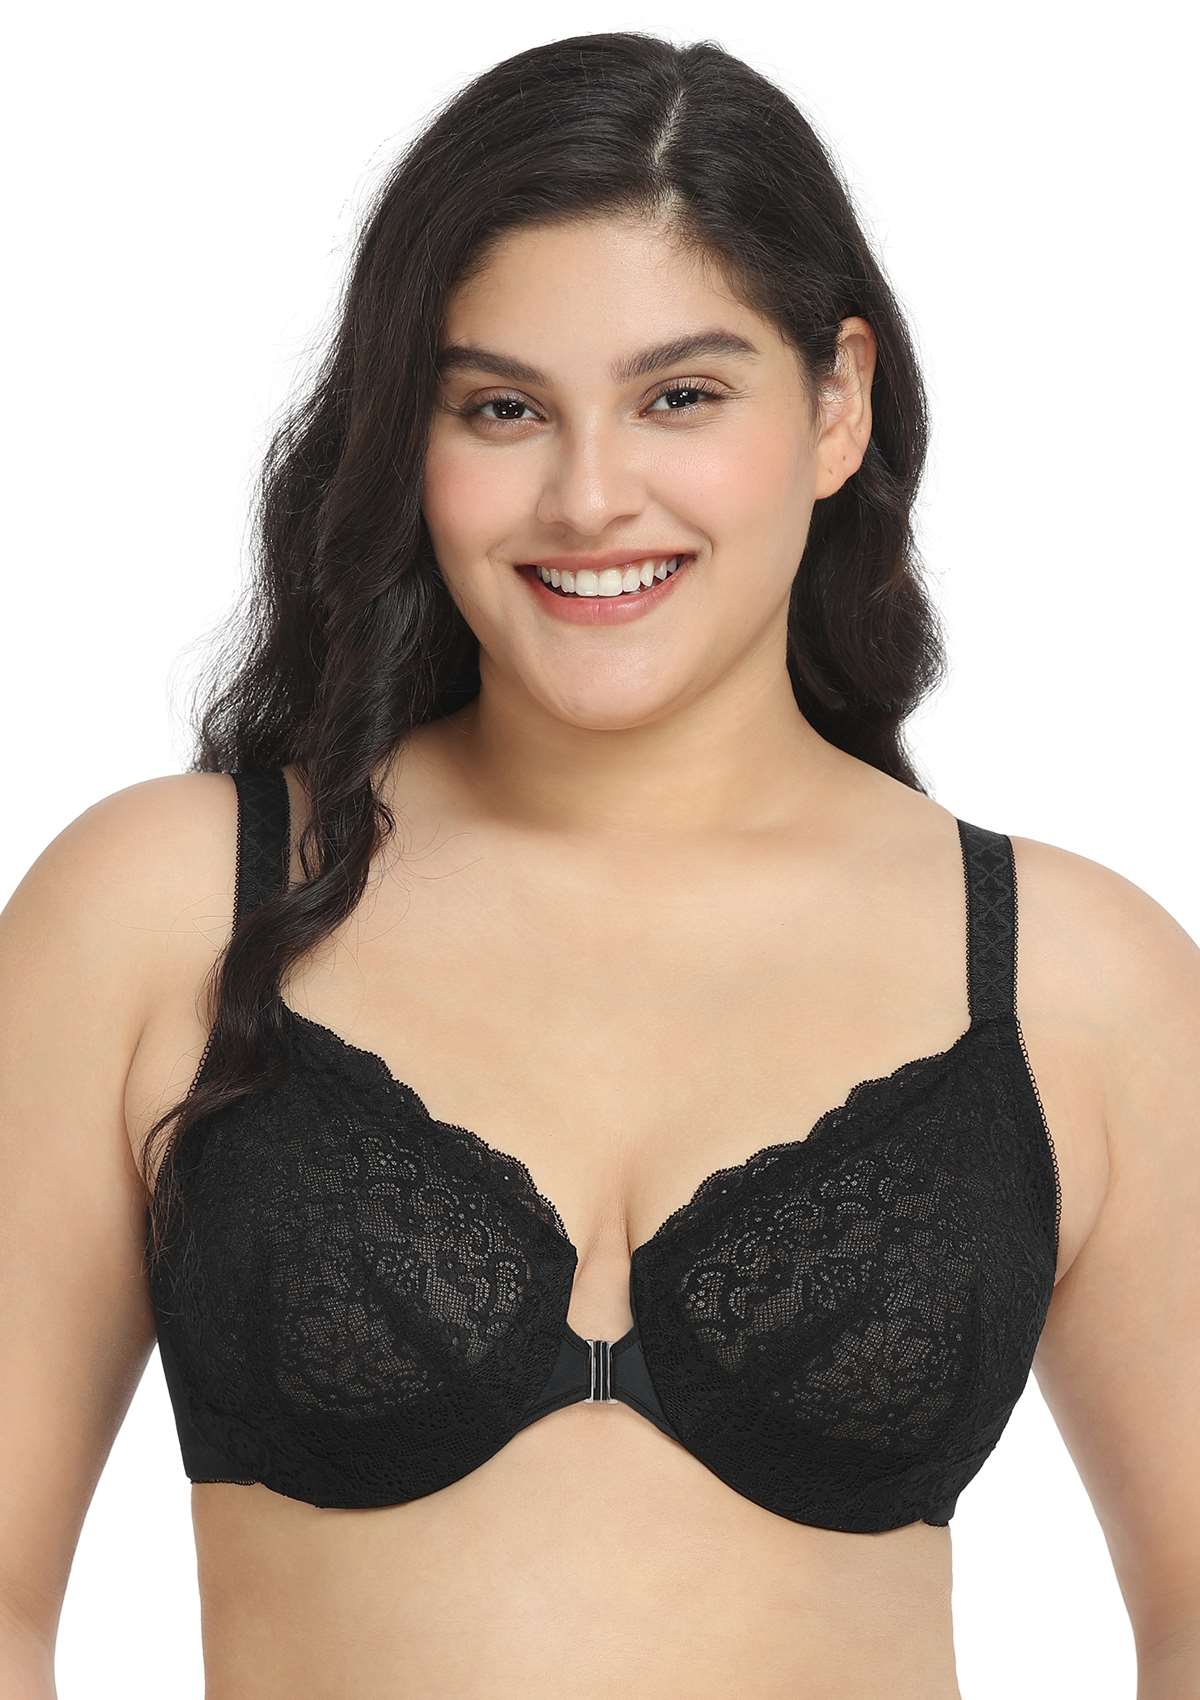 HSIA Nymphaea Front-Close Unlined Retro Floral Lace Back Smoothing Bra - Black / 34 / DDD/F